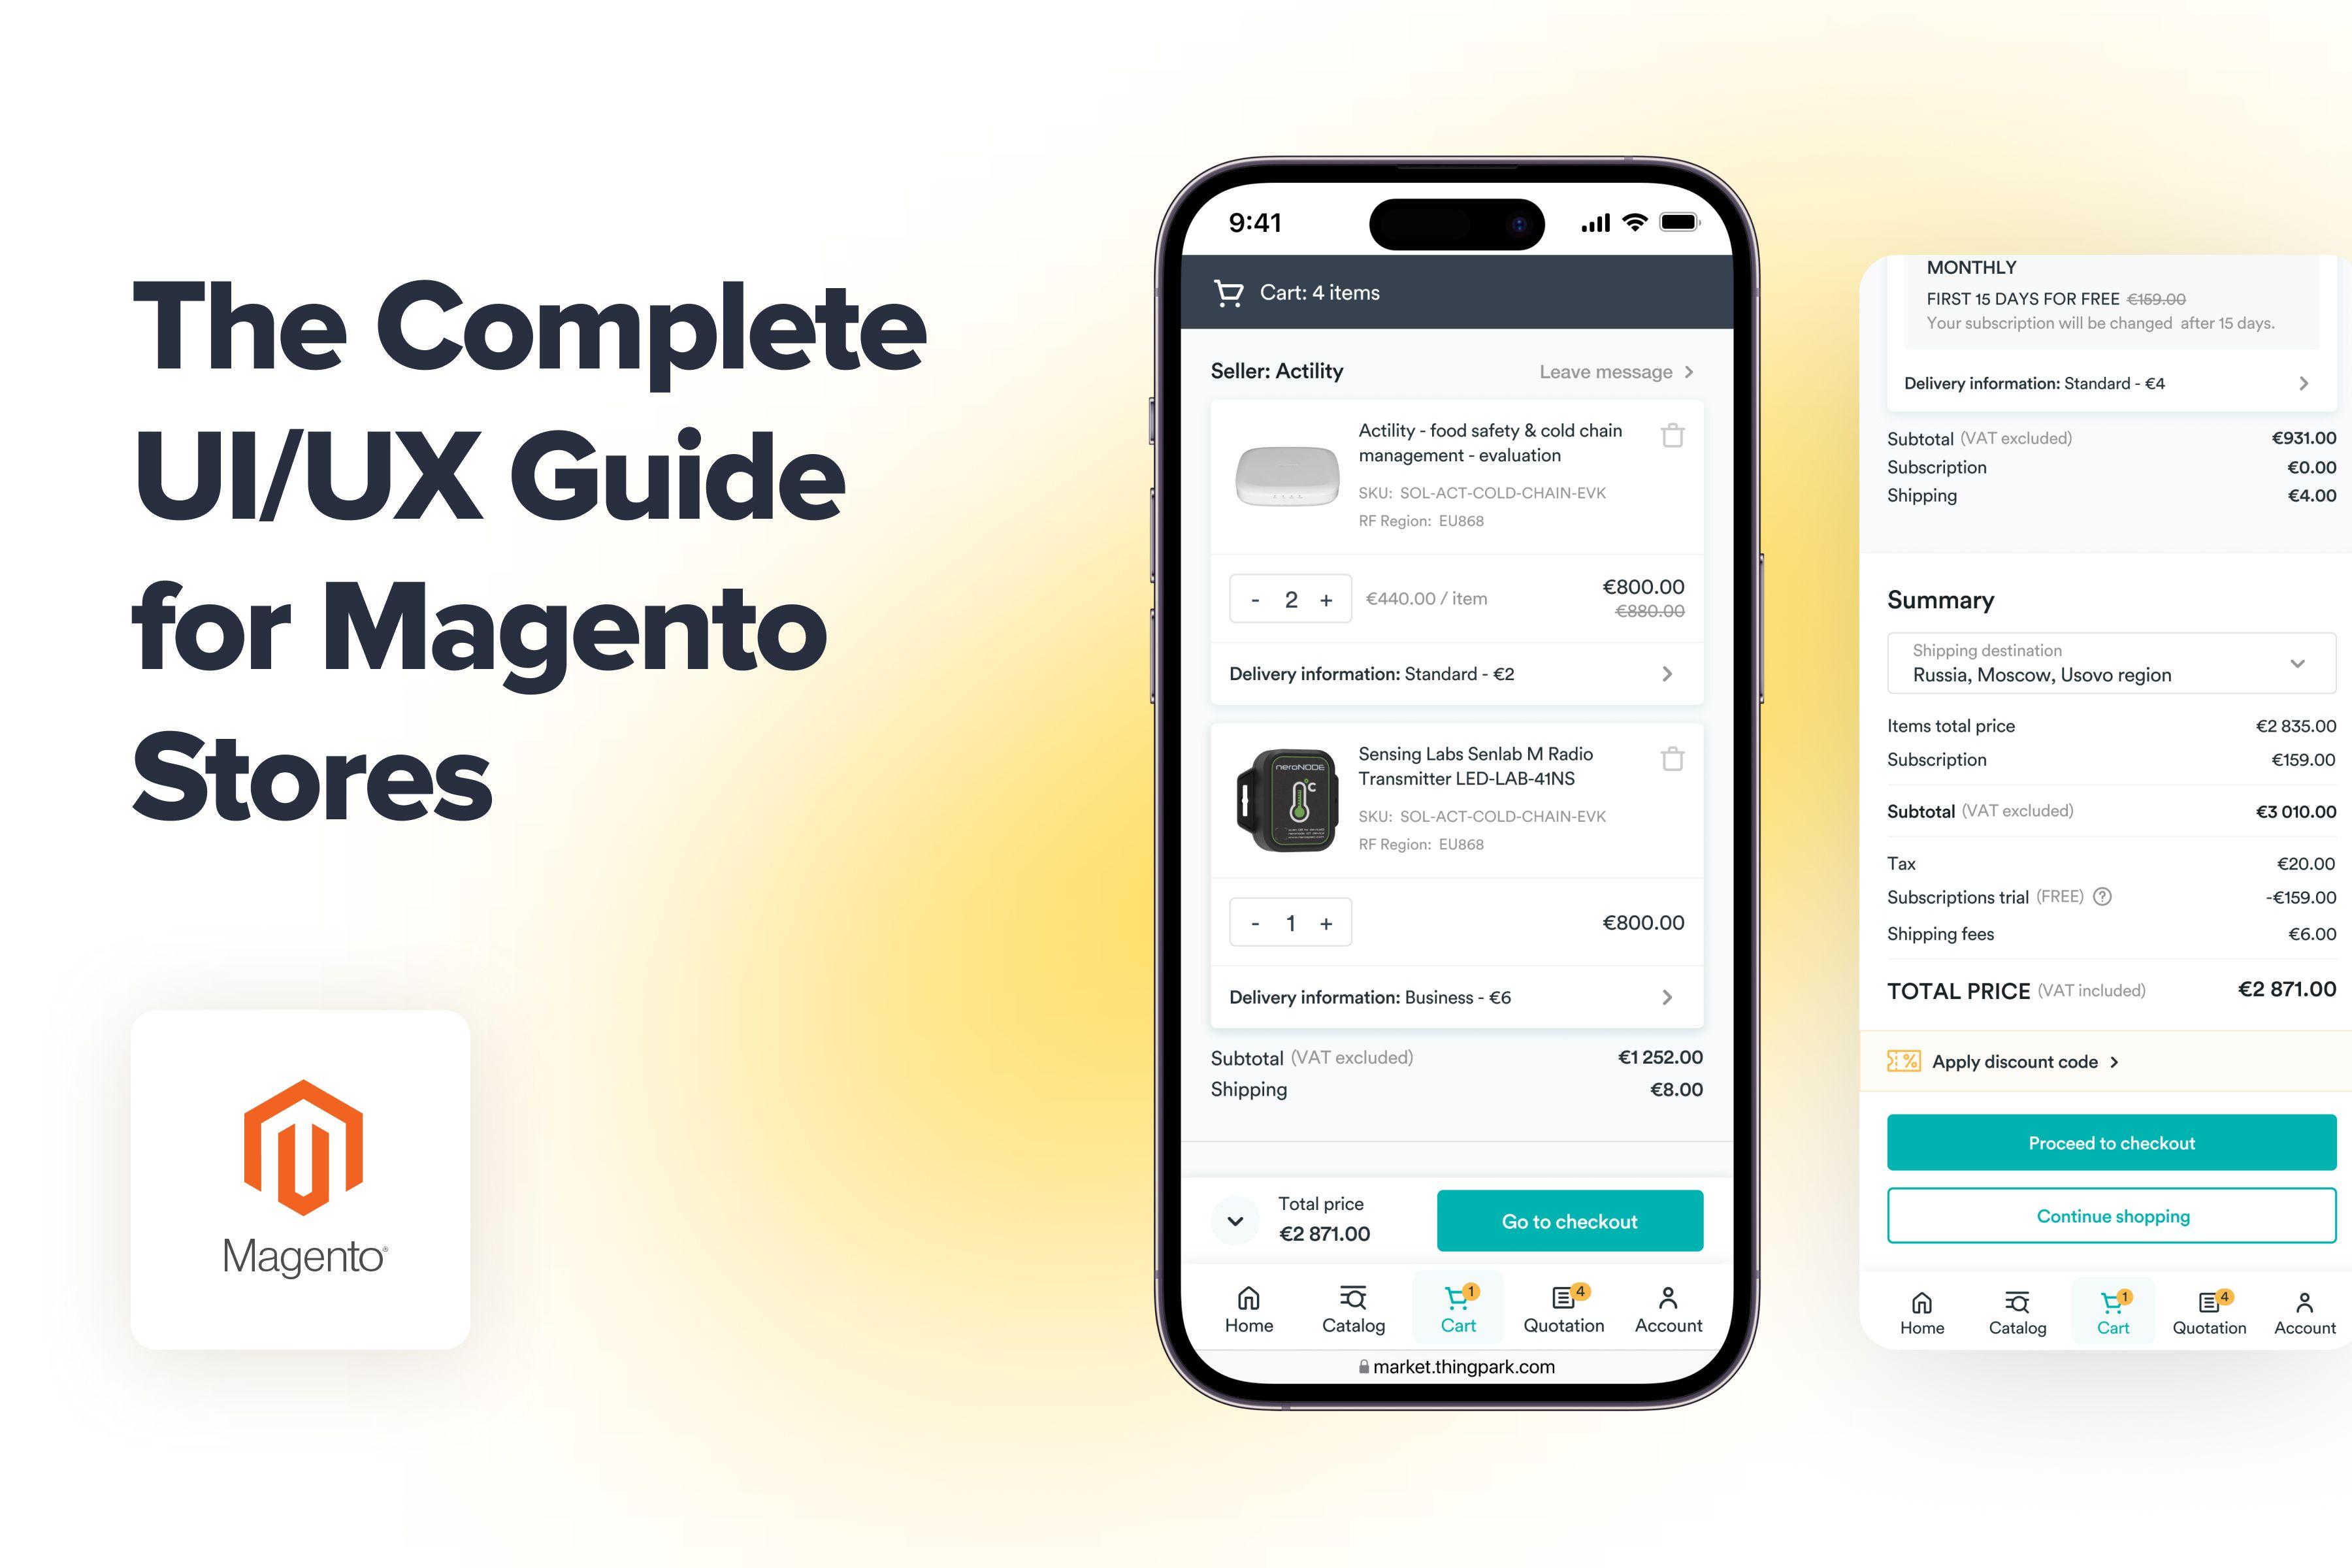 The Complete UI/UX Guide for Magento Stores